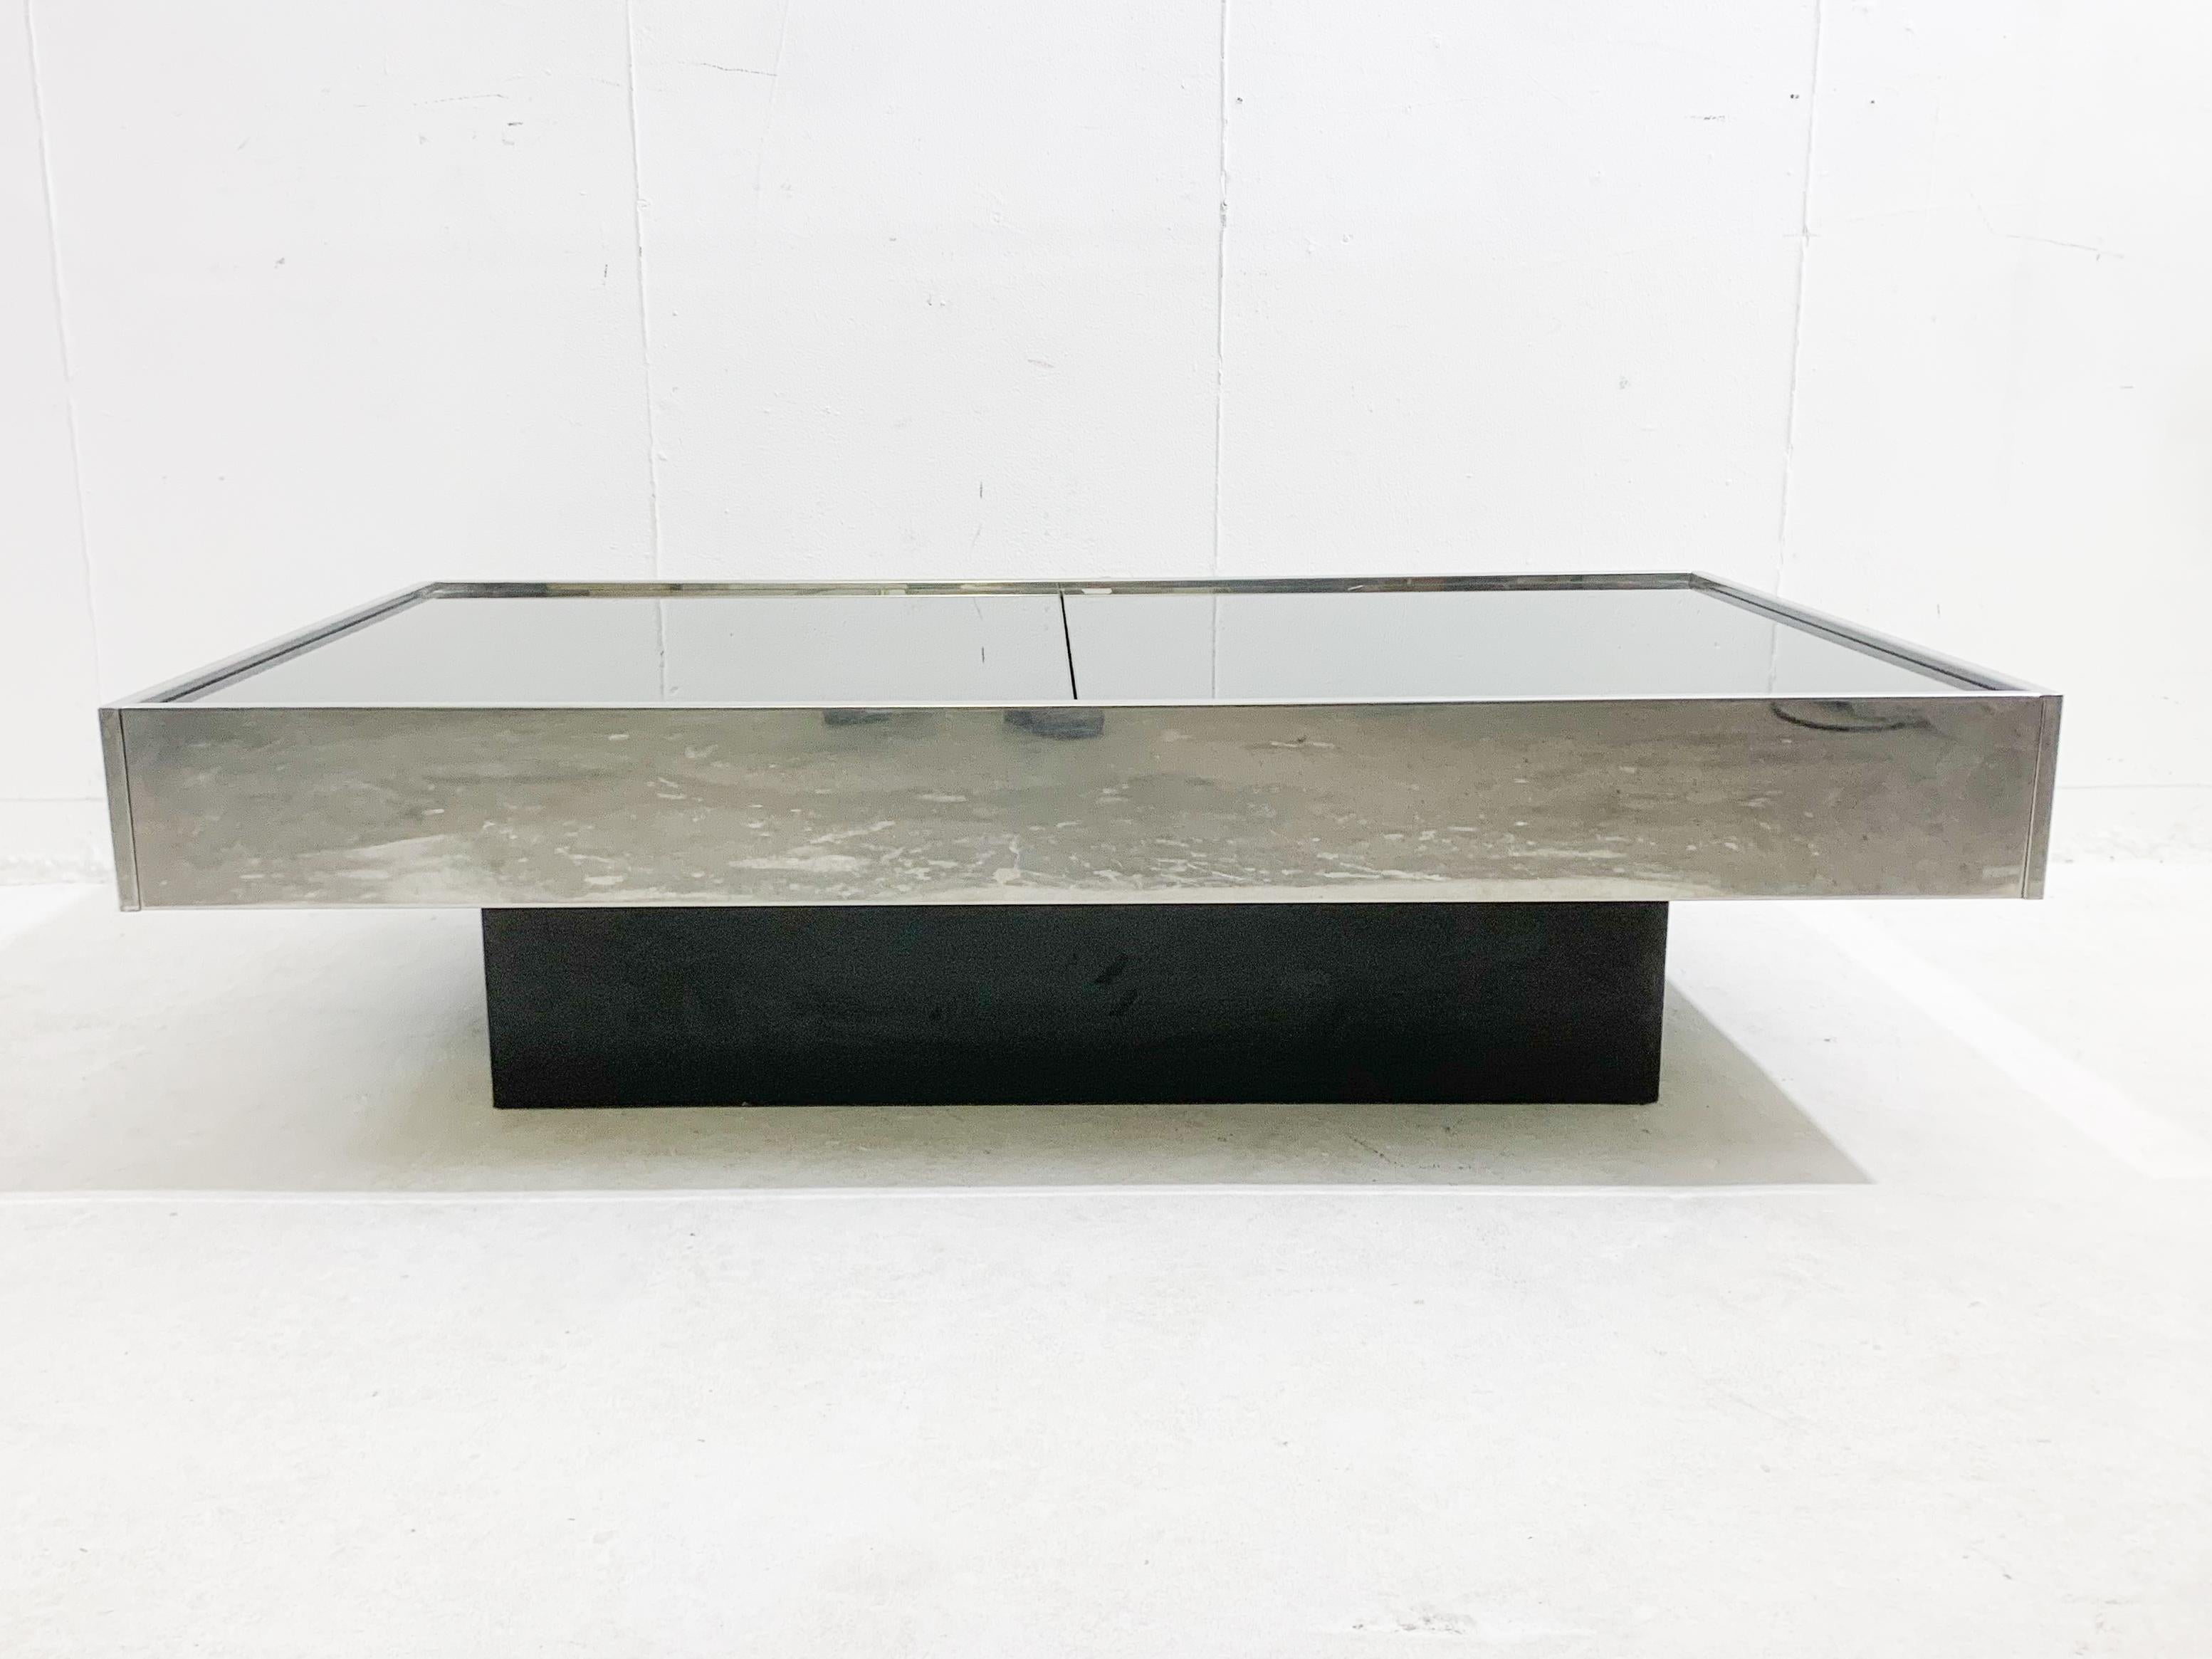 Italian Mid-century chrome and mirror sliding bar coffee table by Willy Rizzo - Italy